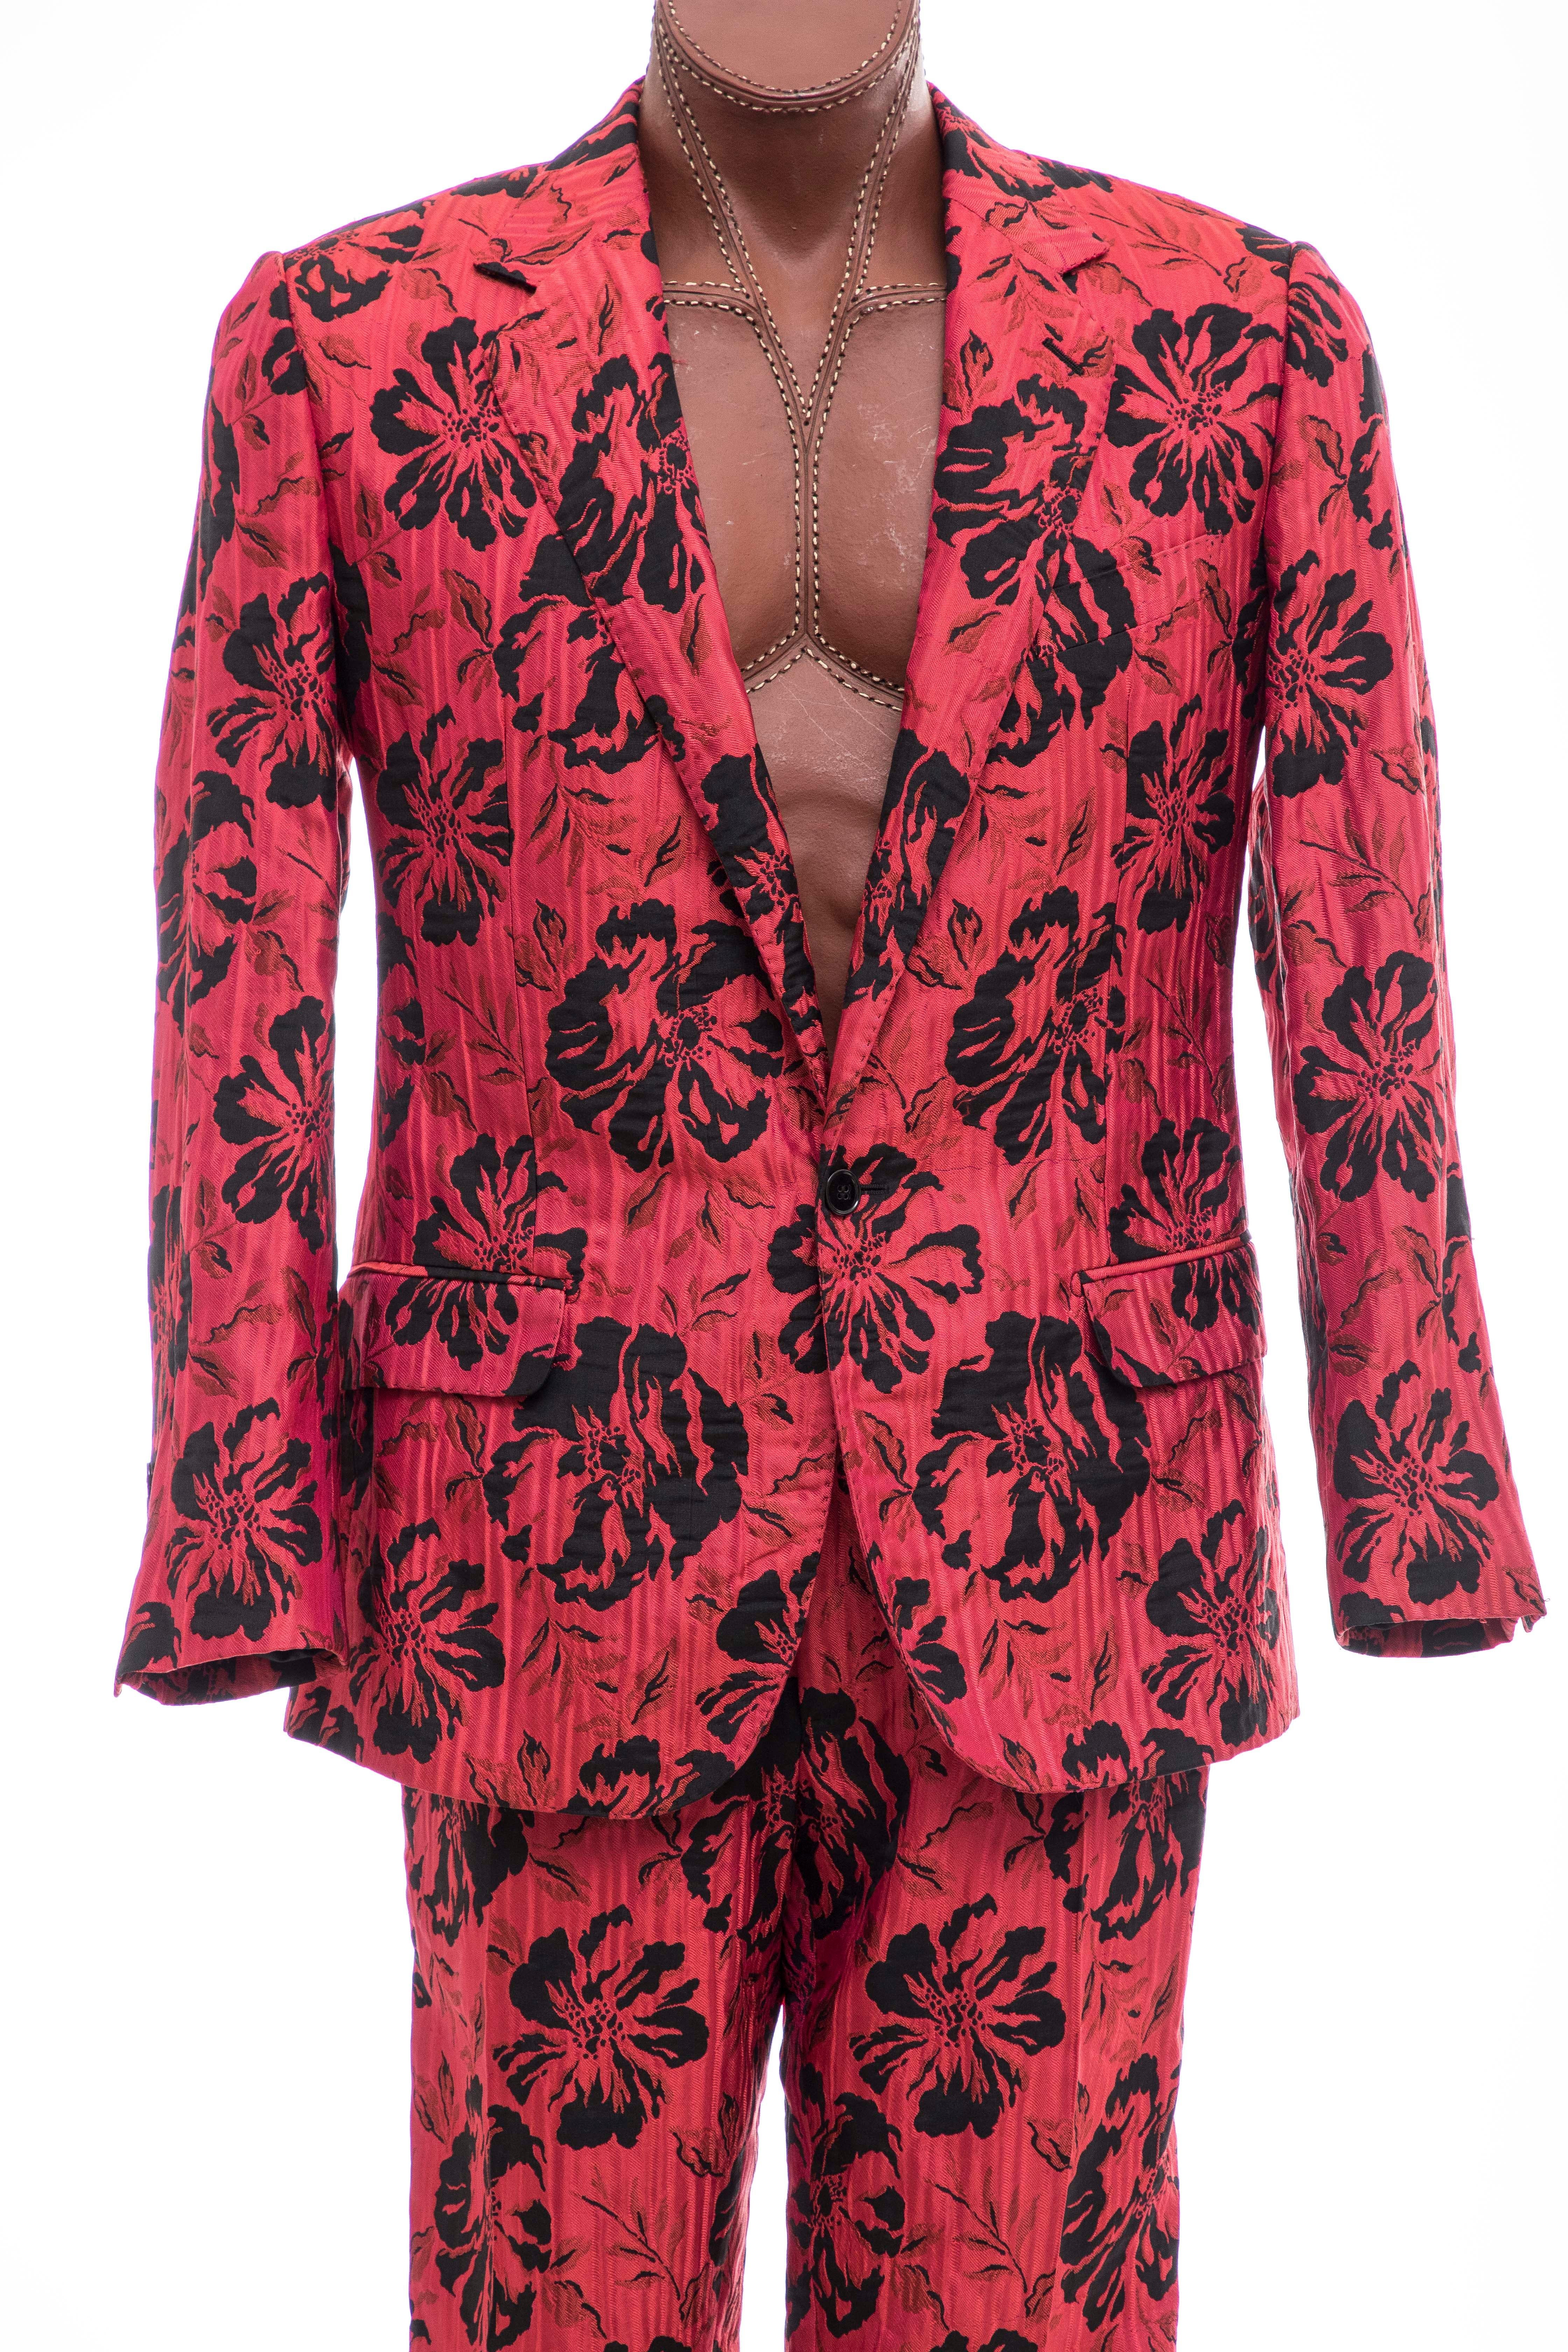 Dolce & Gabbana Men's Runway Red Floral Jacquard Suit, Fall 2011 7